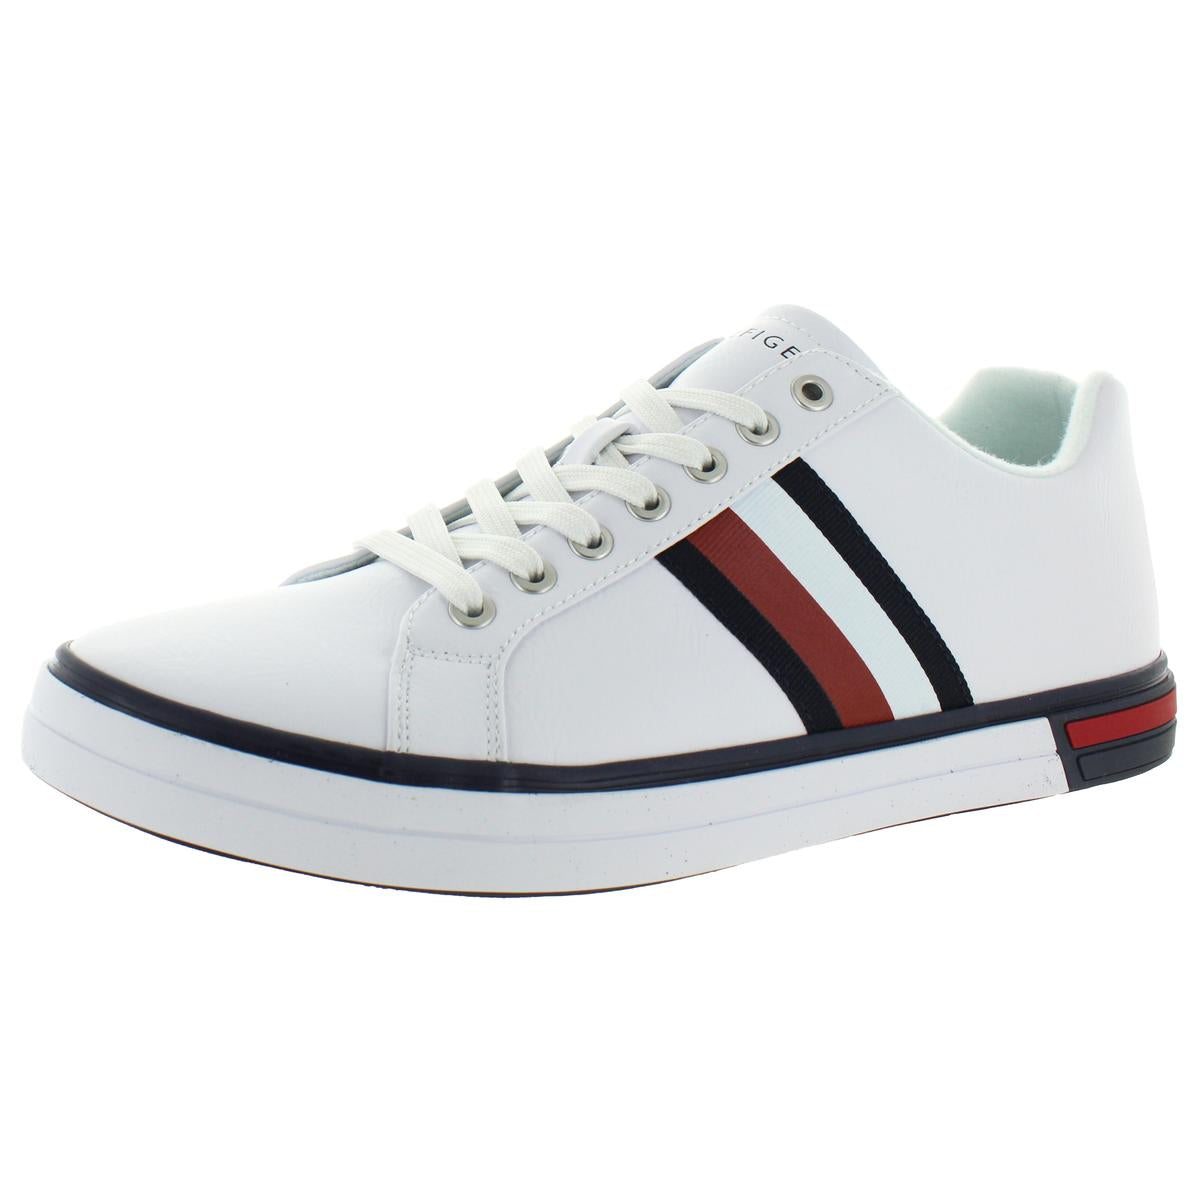 Tommy Hilfiger Mens Roux 2 Lifestyle Athleisure Fashion Sneakers